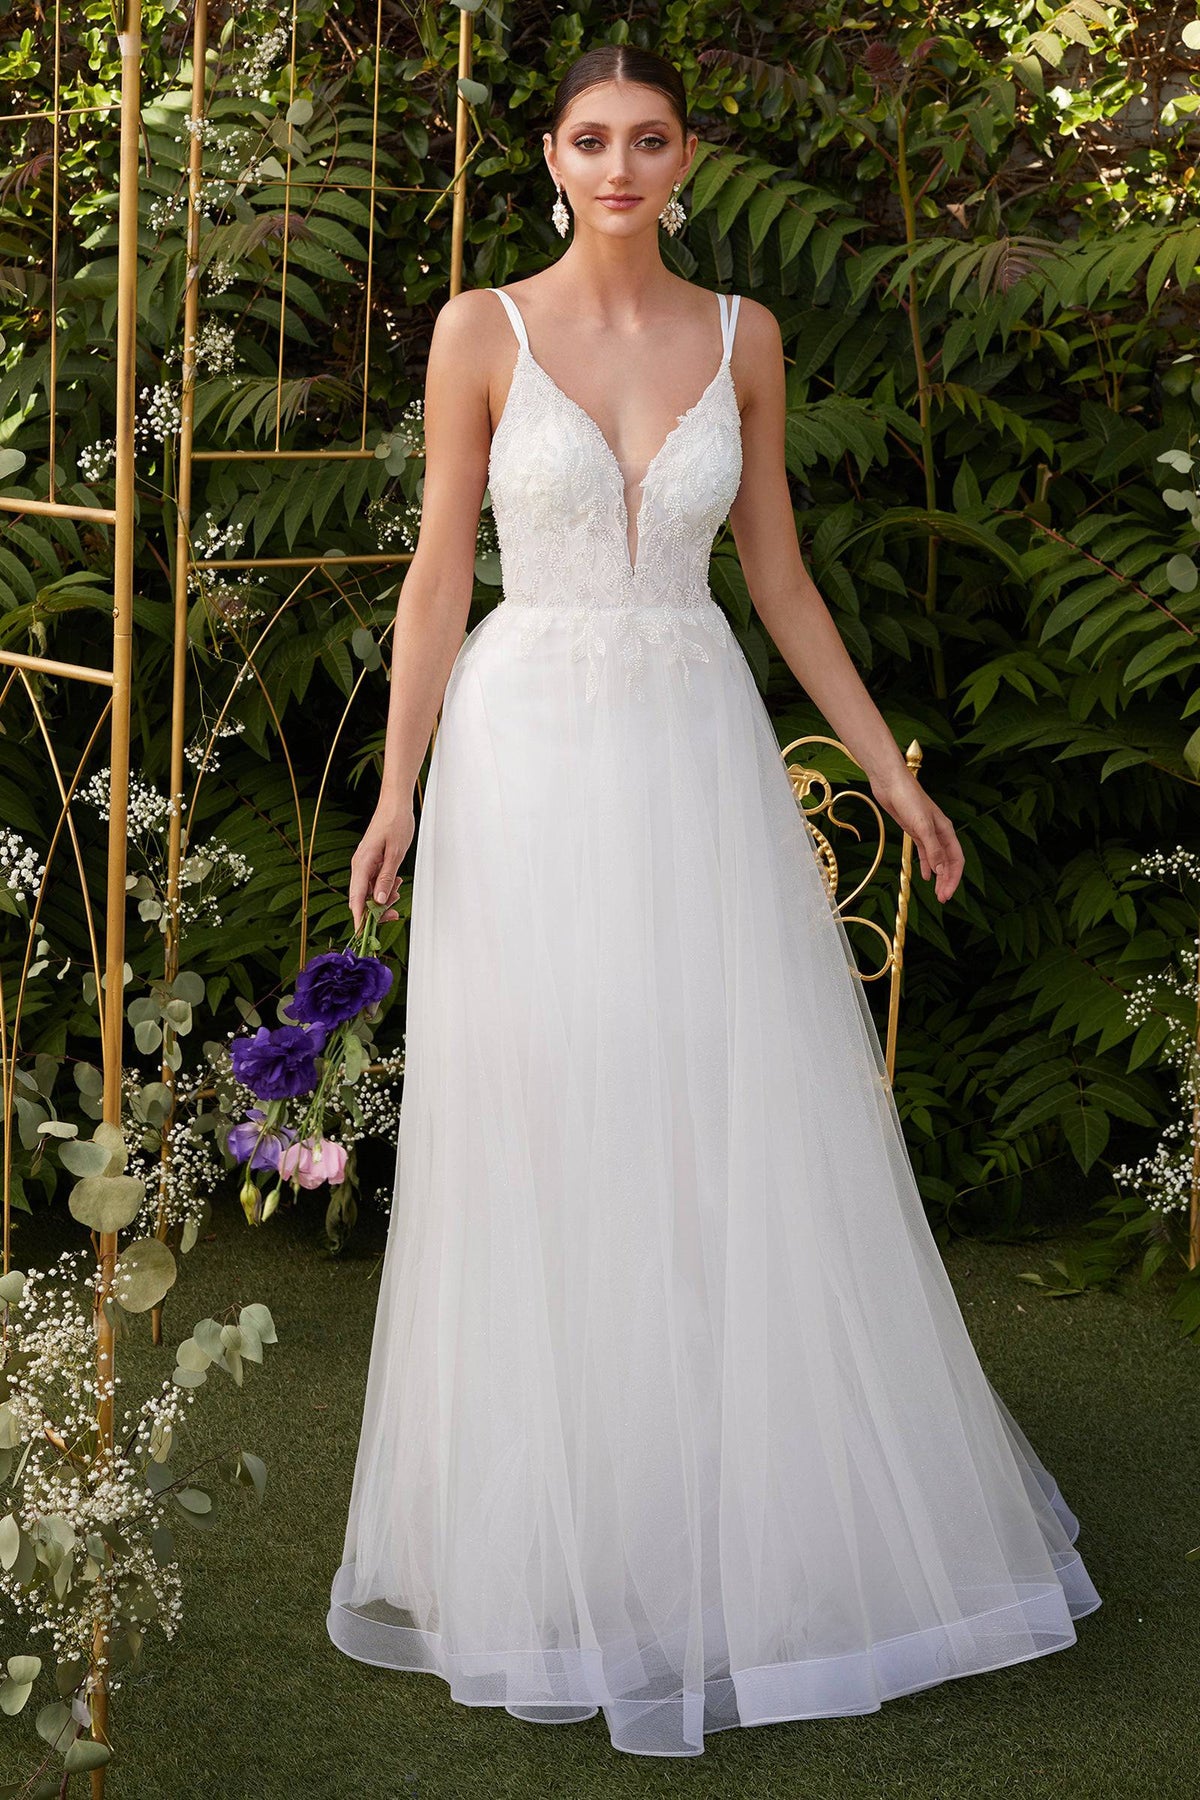 Elegant Deep Neckline Wedding Gown with Layered Skirt #CDCD0154 - NORMA REED